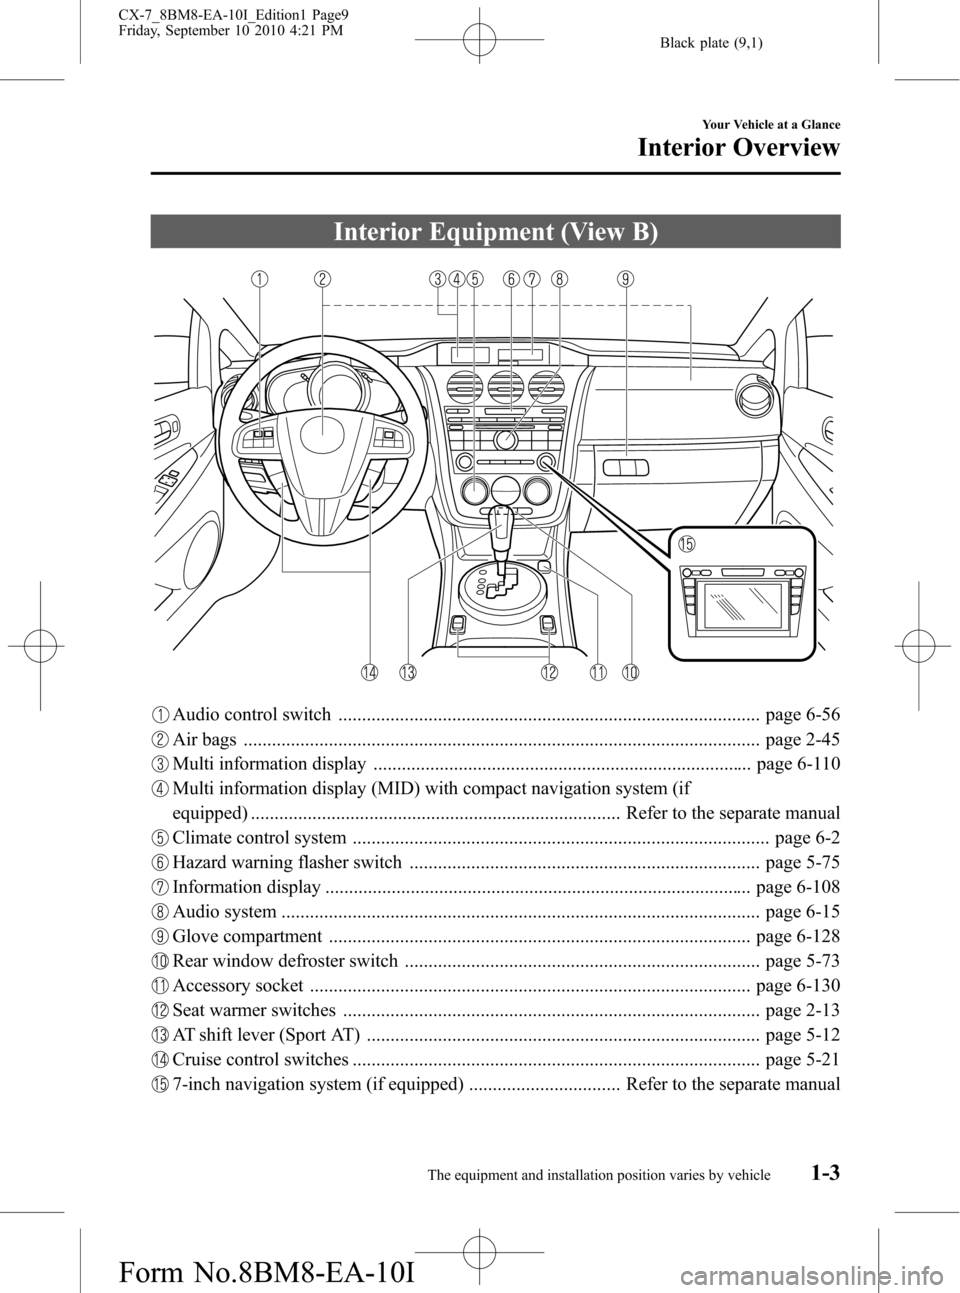 MAZDA MODEL CX-7 2011  Owners Manual (in English) Black plate (9,1)
Interior Equipment (View B)
Audio control switch ......................................................................................... page 6-56
Air bags ........................